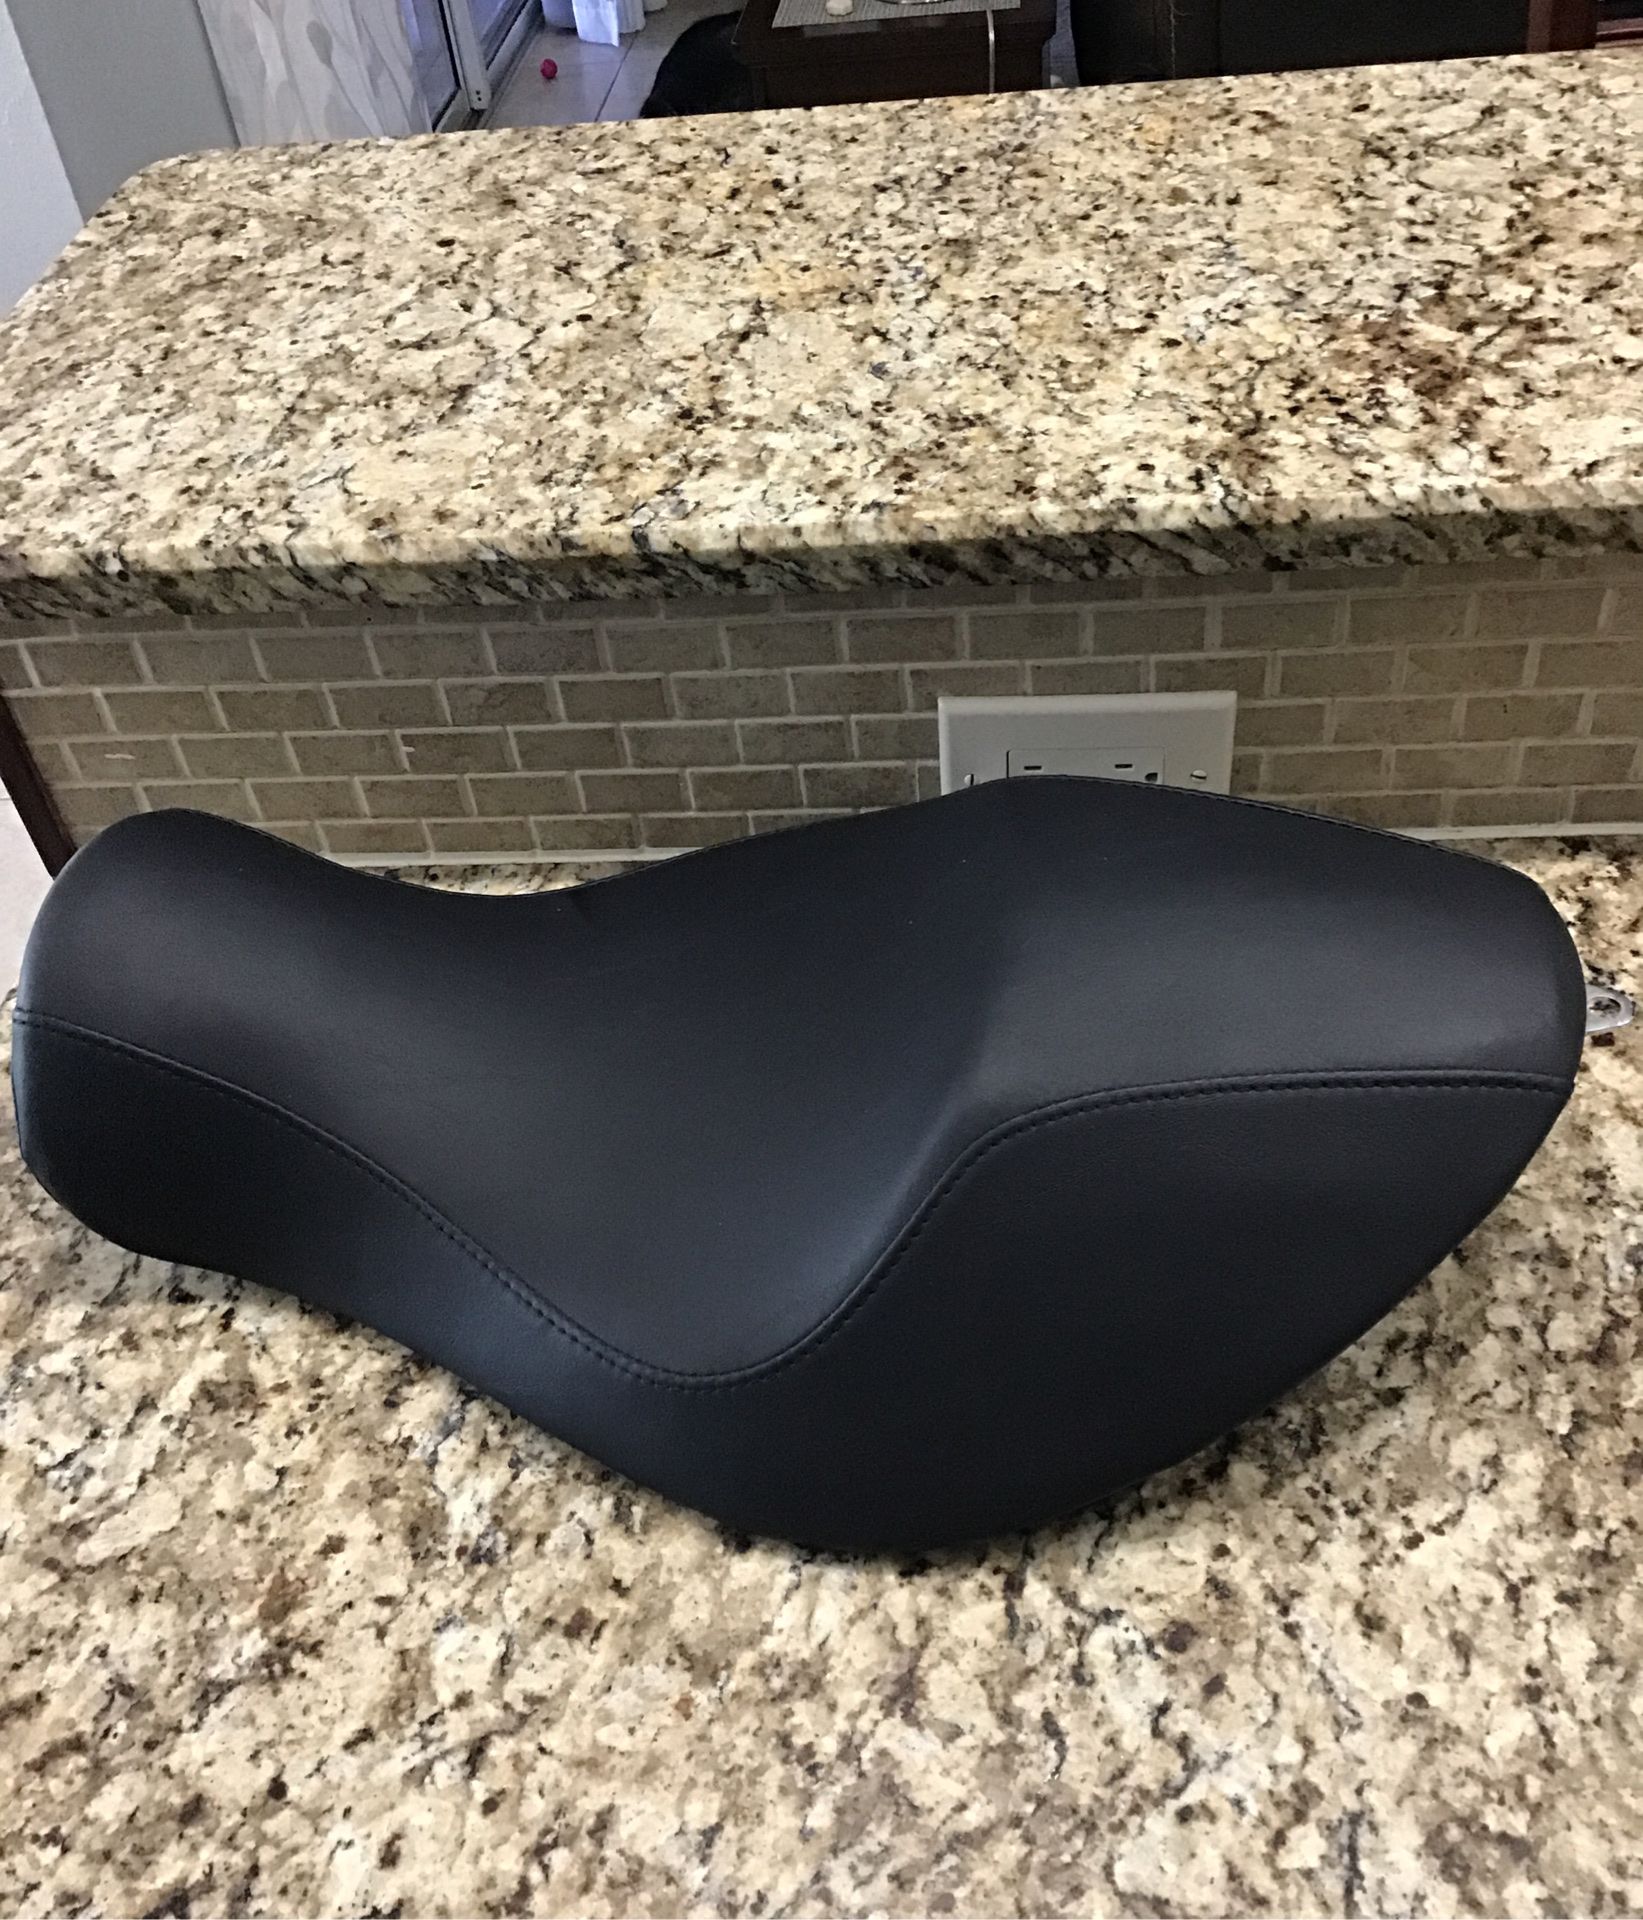 Harley Davidson seat, excellent condition came off 2009 Softail Heritage.